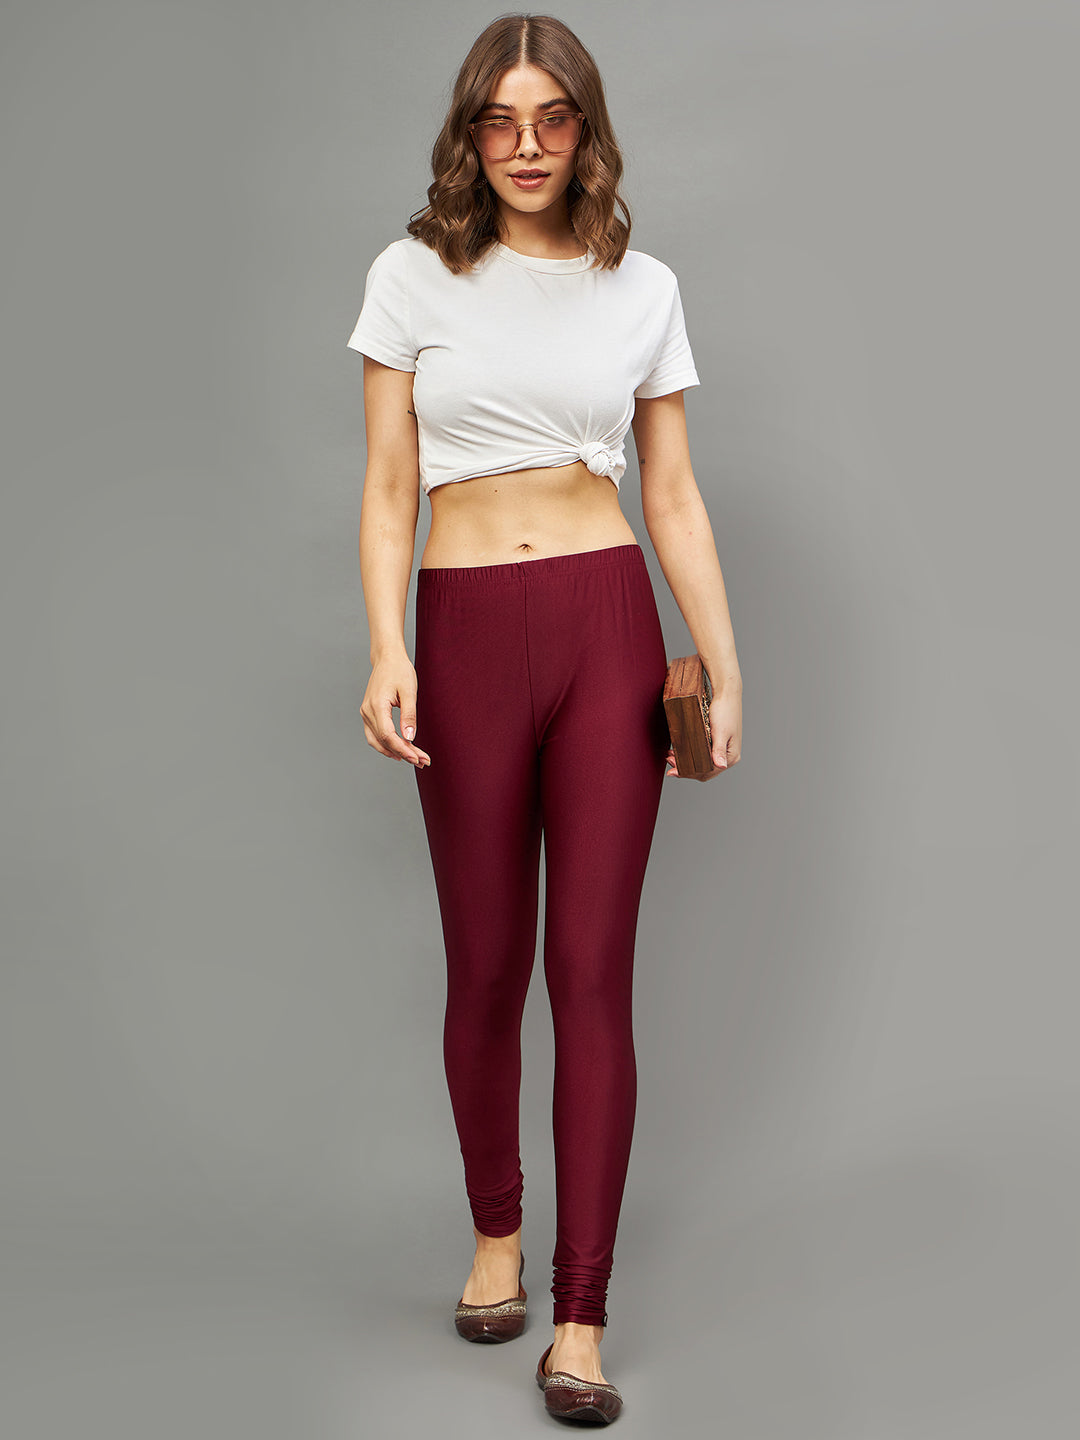 Footed Ethnic Wear Legging with Metallic touch Chudi Length- Maroon